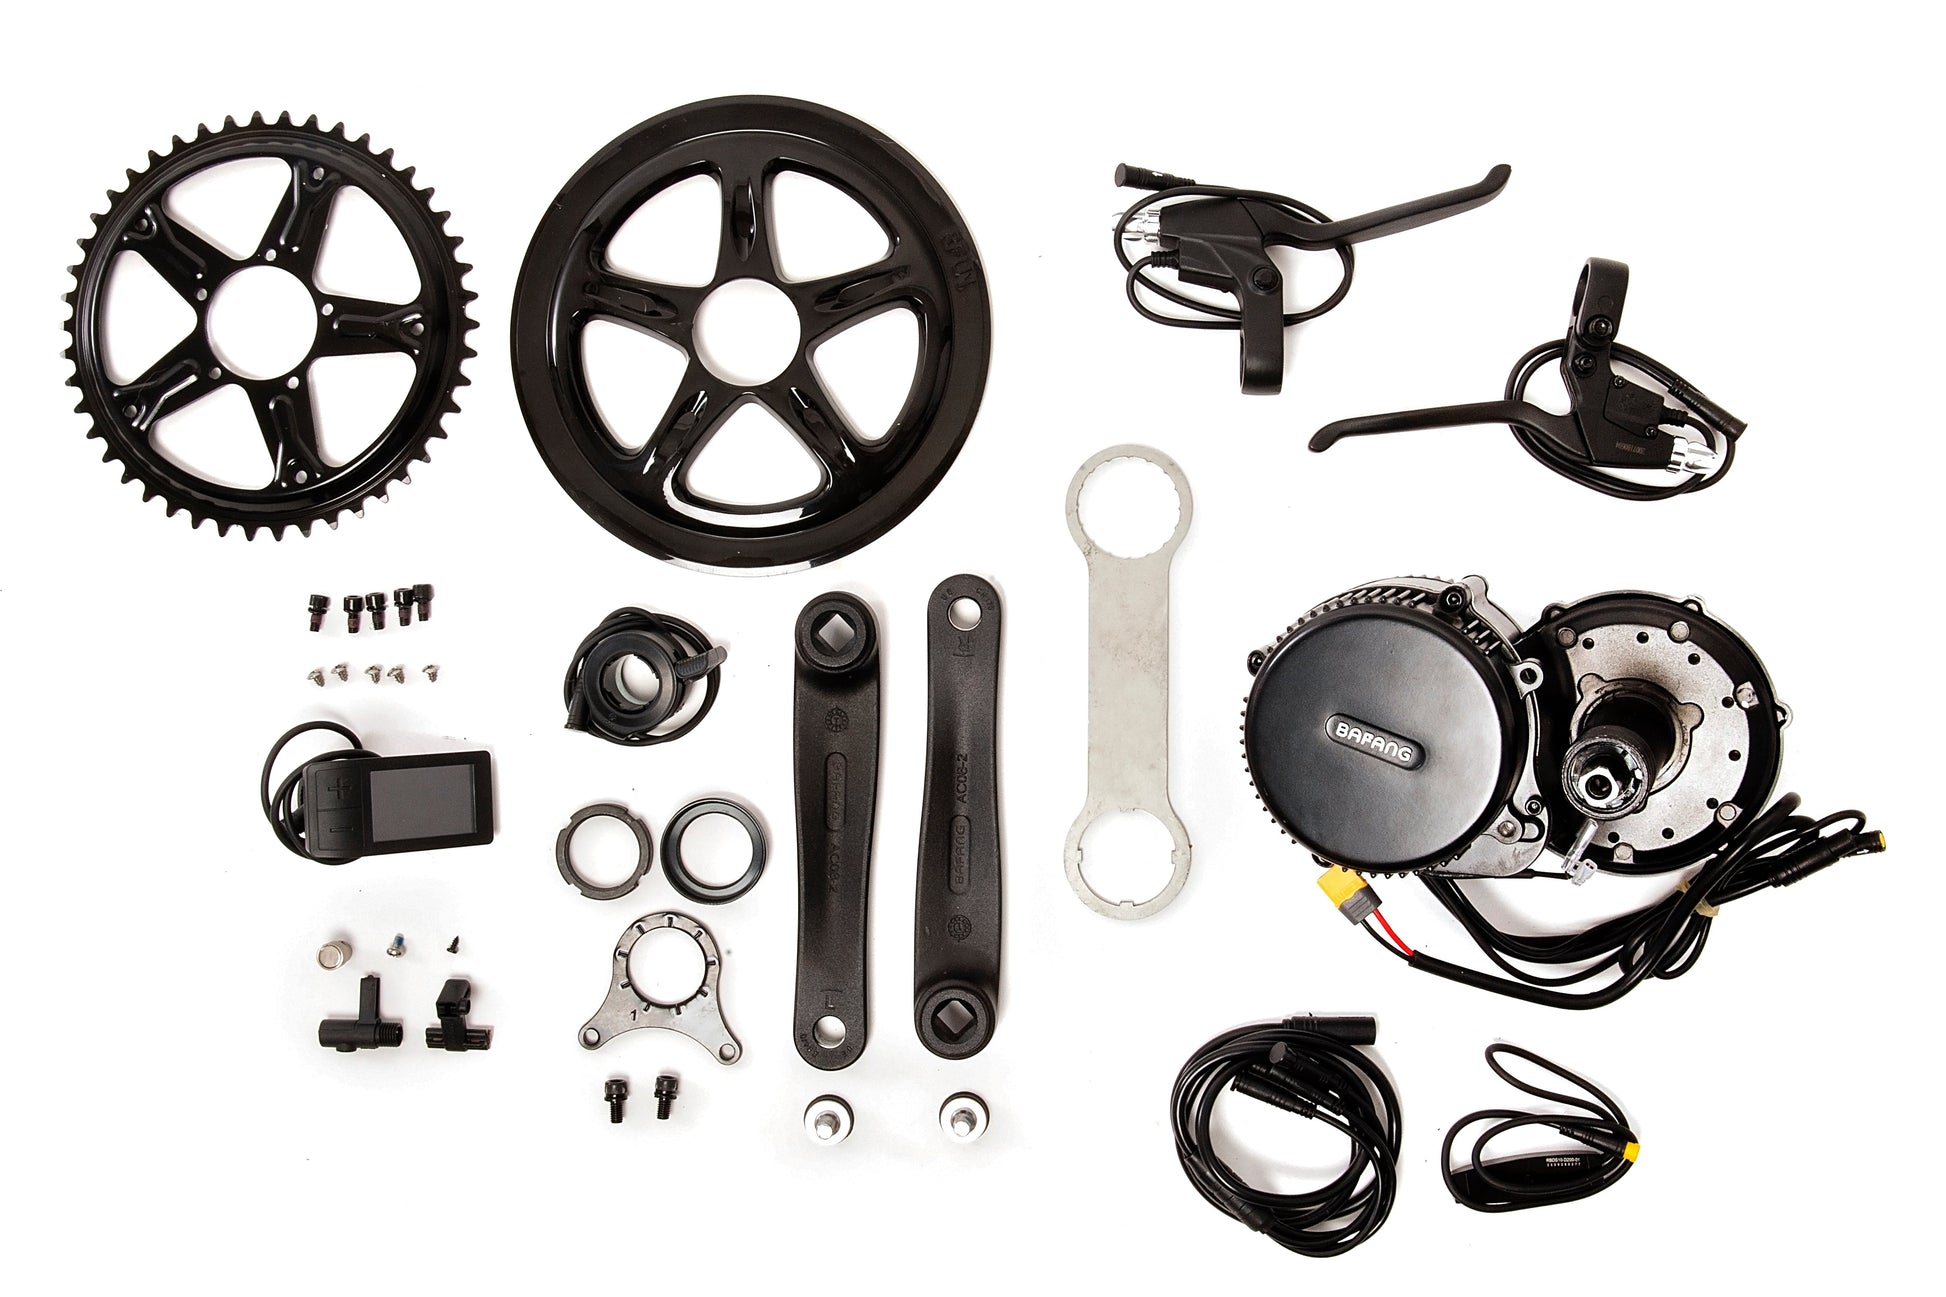 Bafang BBS02 mid drive motor parts and tools for eBike conversion kit laid out on white background